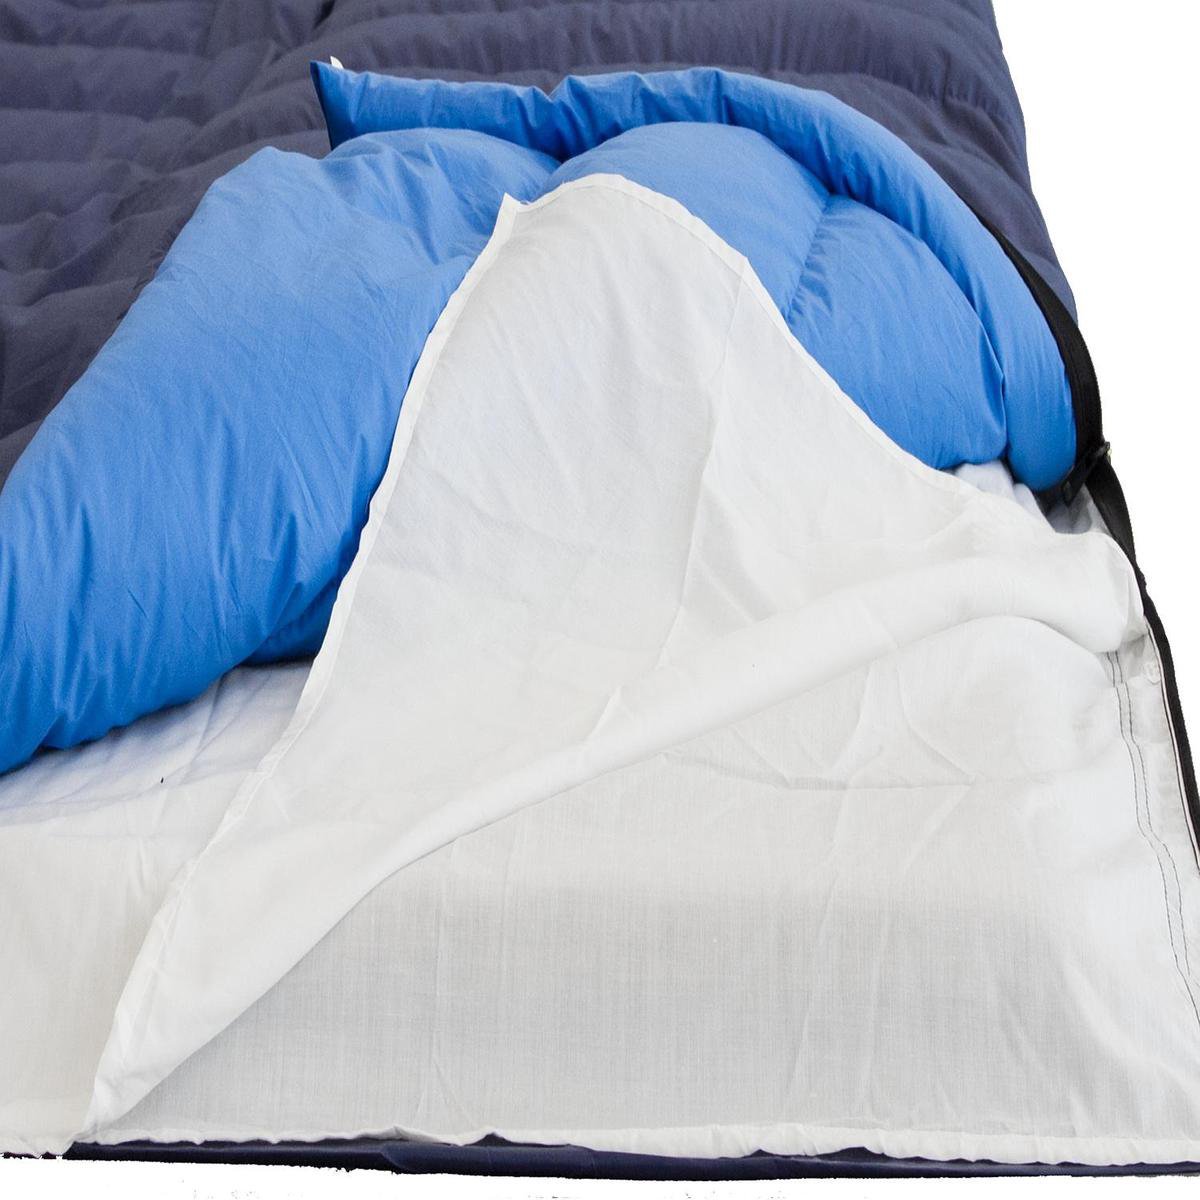 Lowland Duo Iso Hoes - Lakenzak Extra - Thermarest - 2 Persoons | bol.com